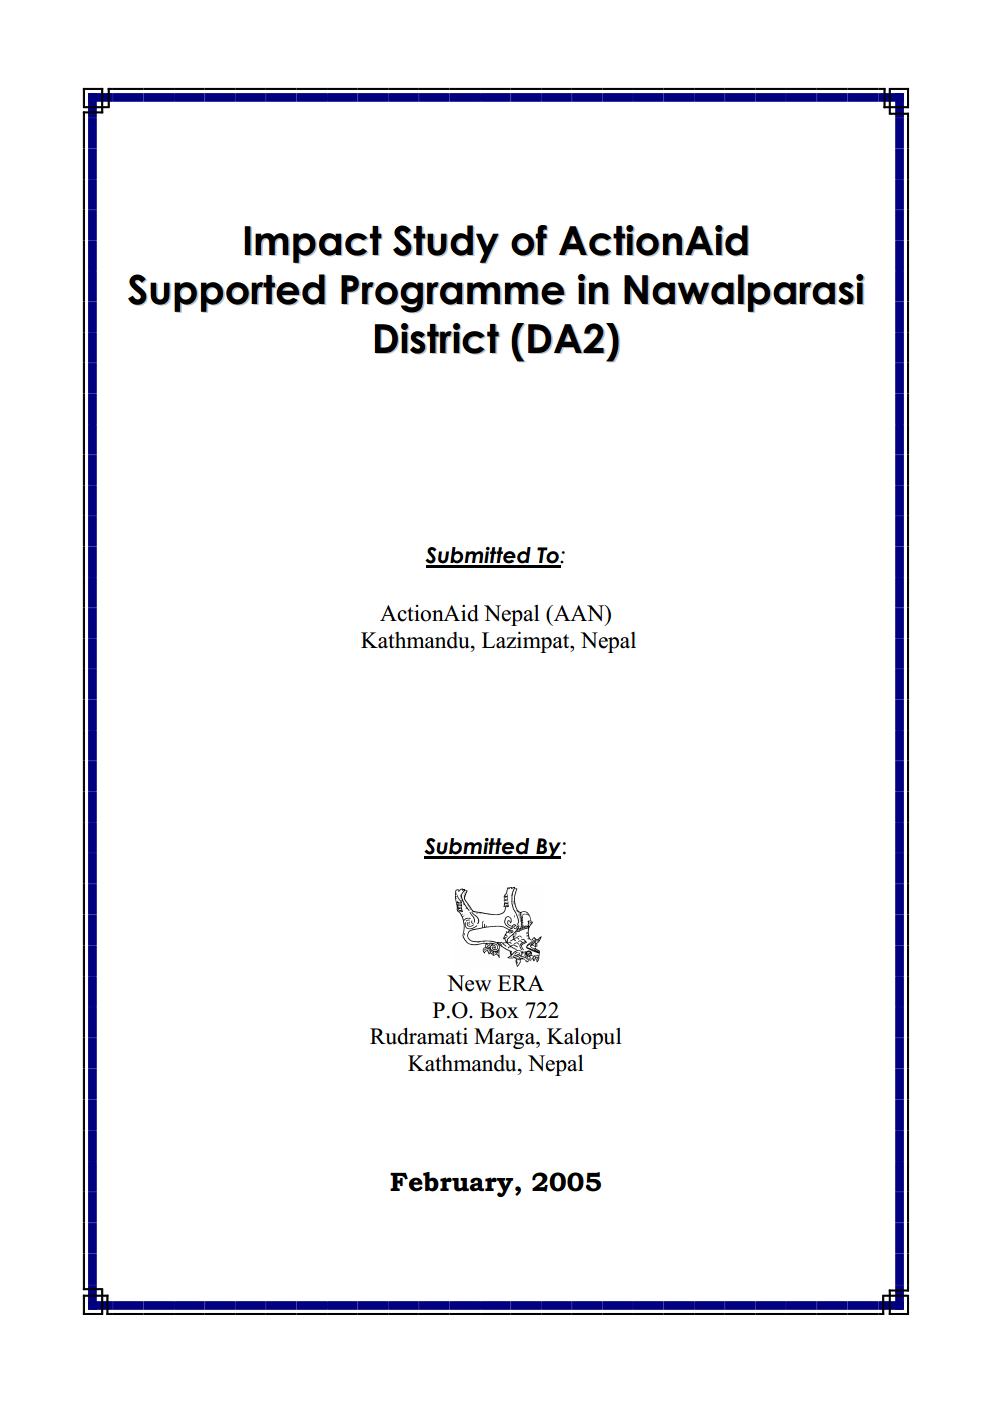 Impact Evaluation Study of ActionAid Nepal Supported Programs in Nawalparasi District (DA 2)